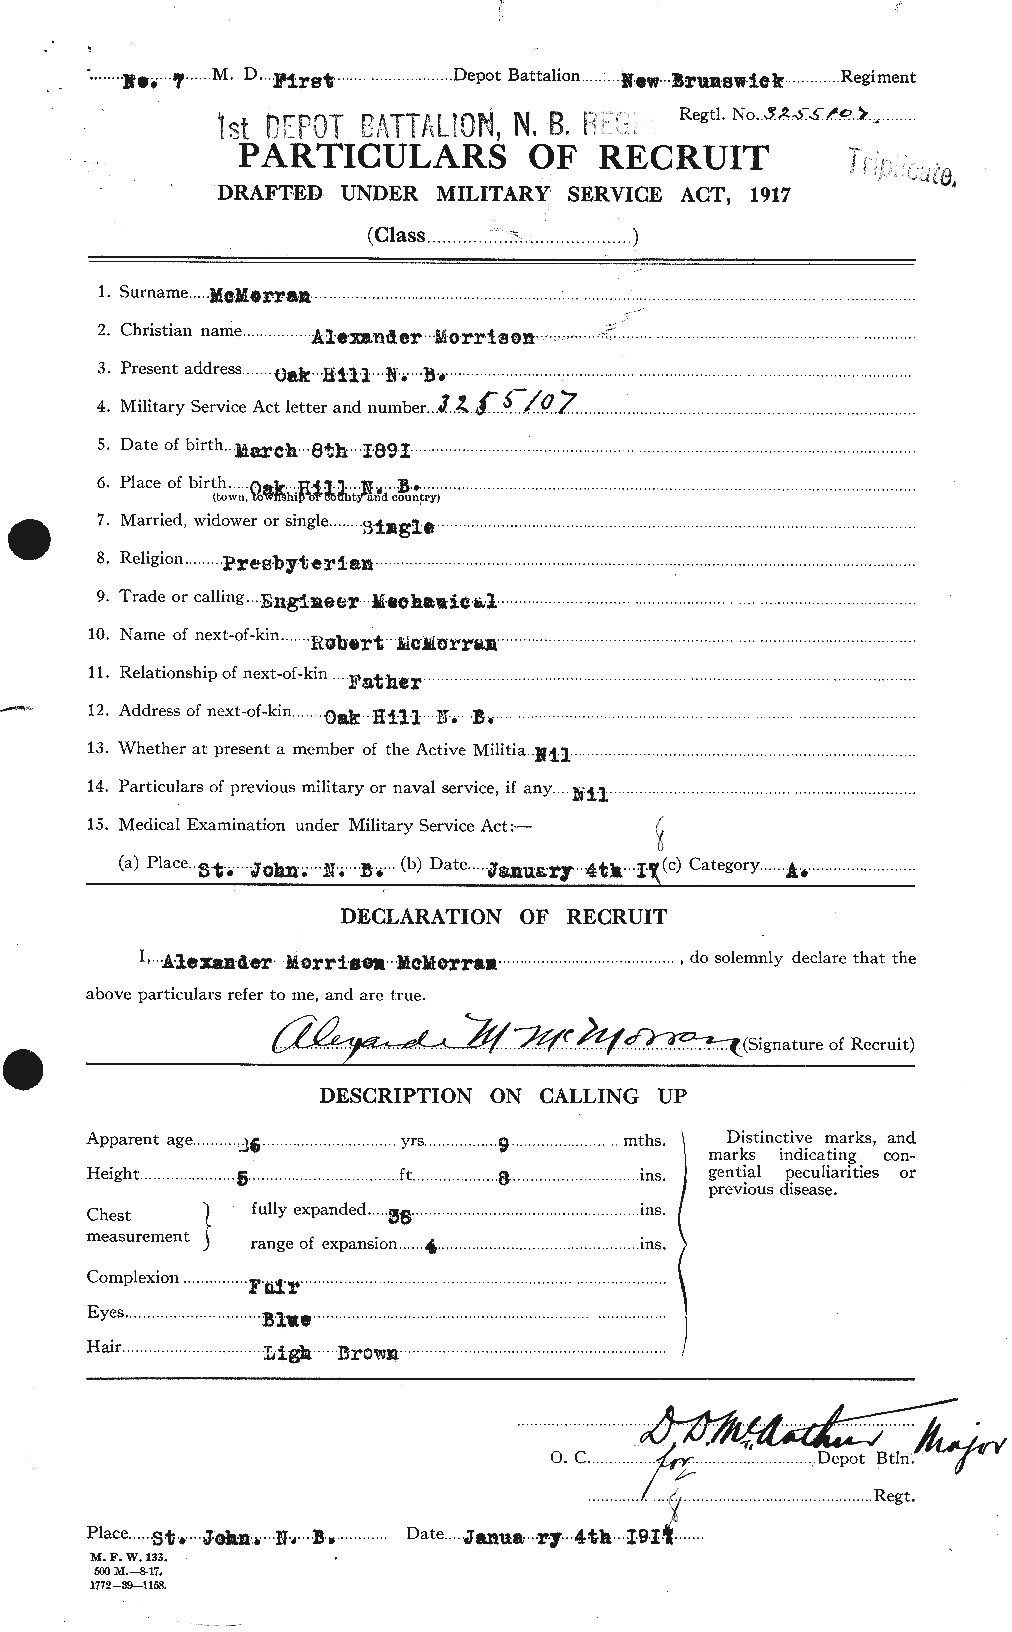 Personnel Records of the First World War - CEF 537103a